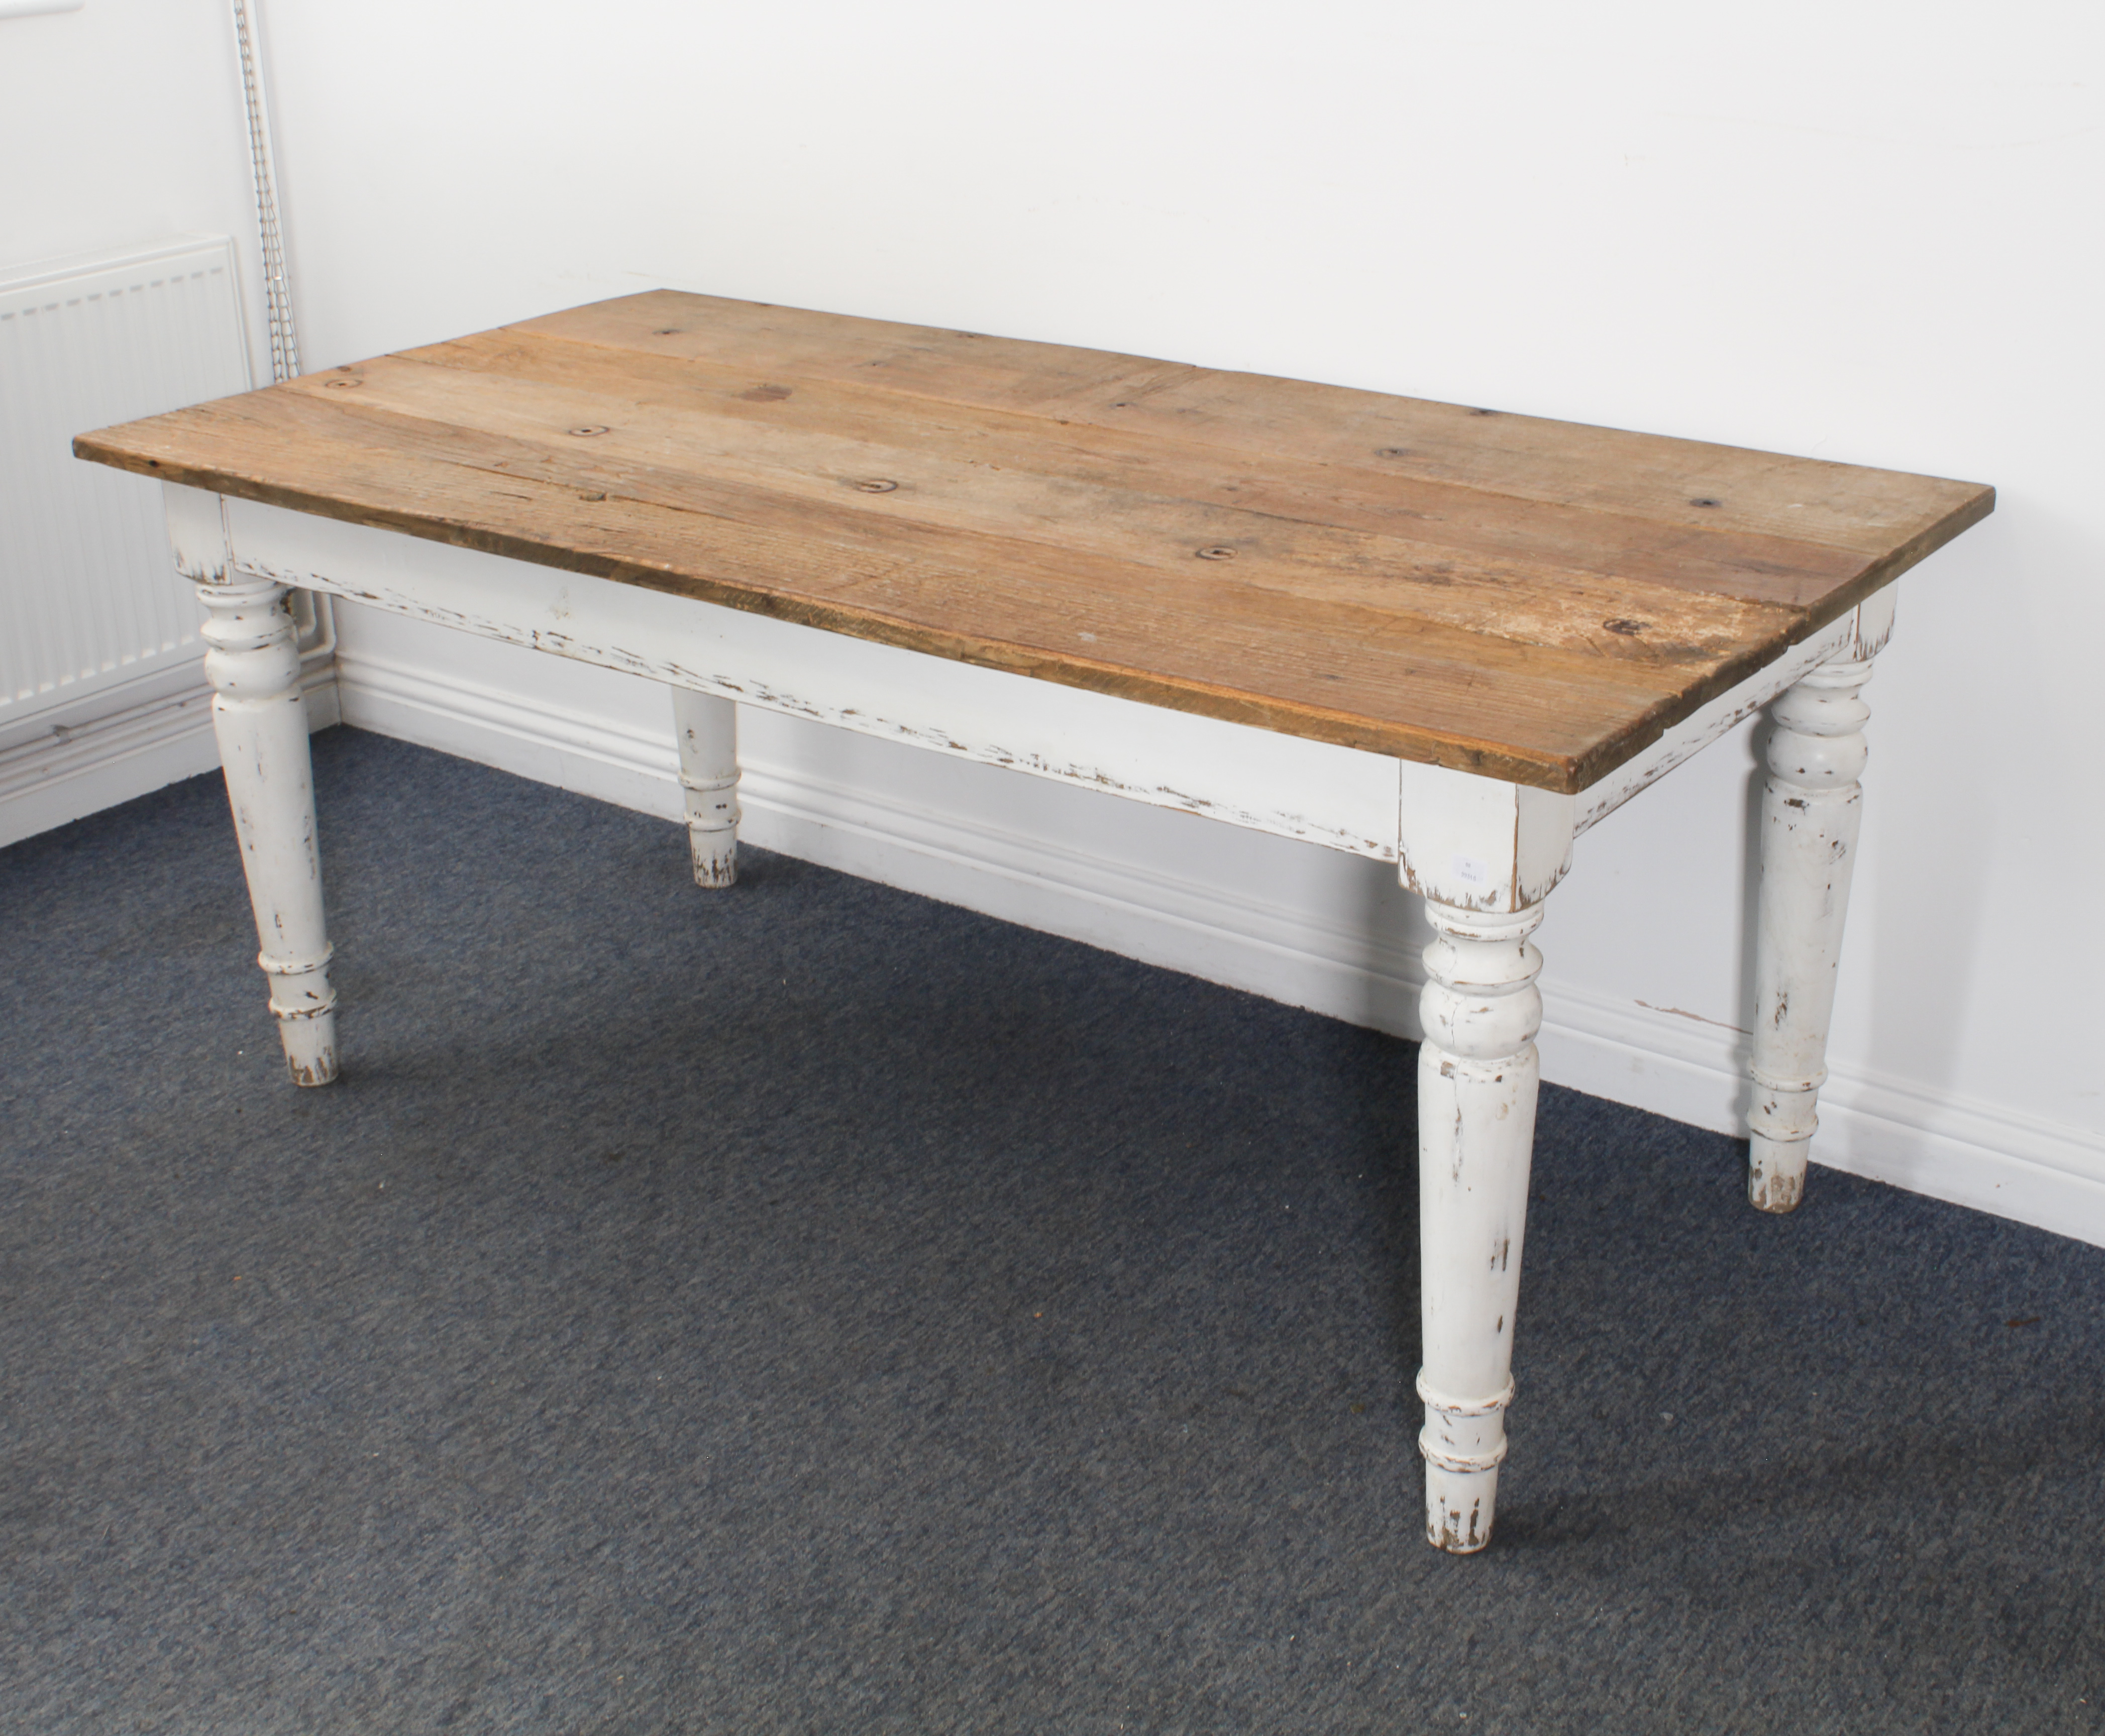 An oak farmhouse kitchen dining table in 19th century style - the rustic, planked top raised on an - Bild 5 aus 7